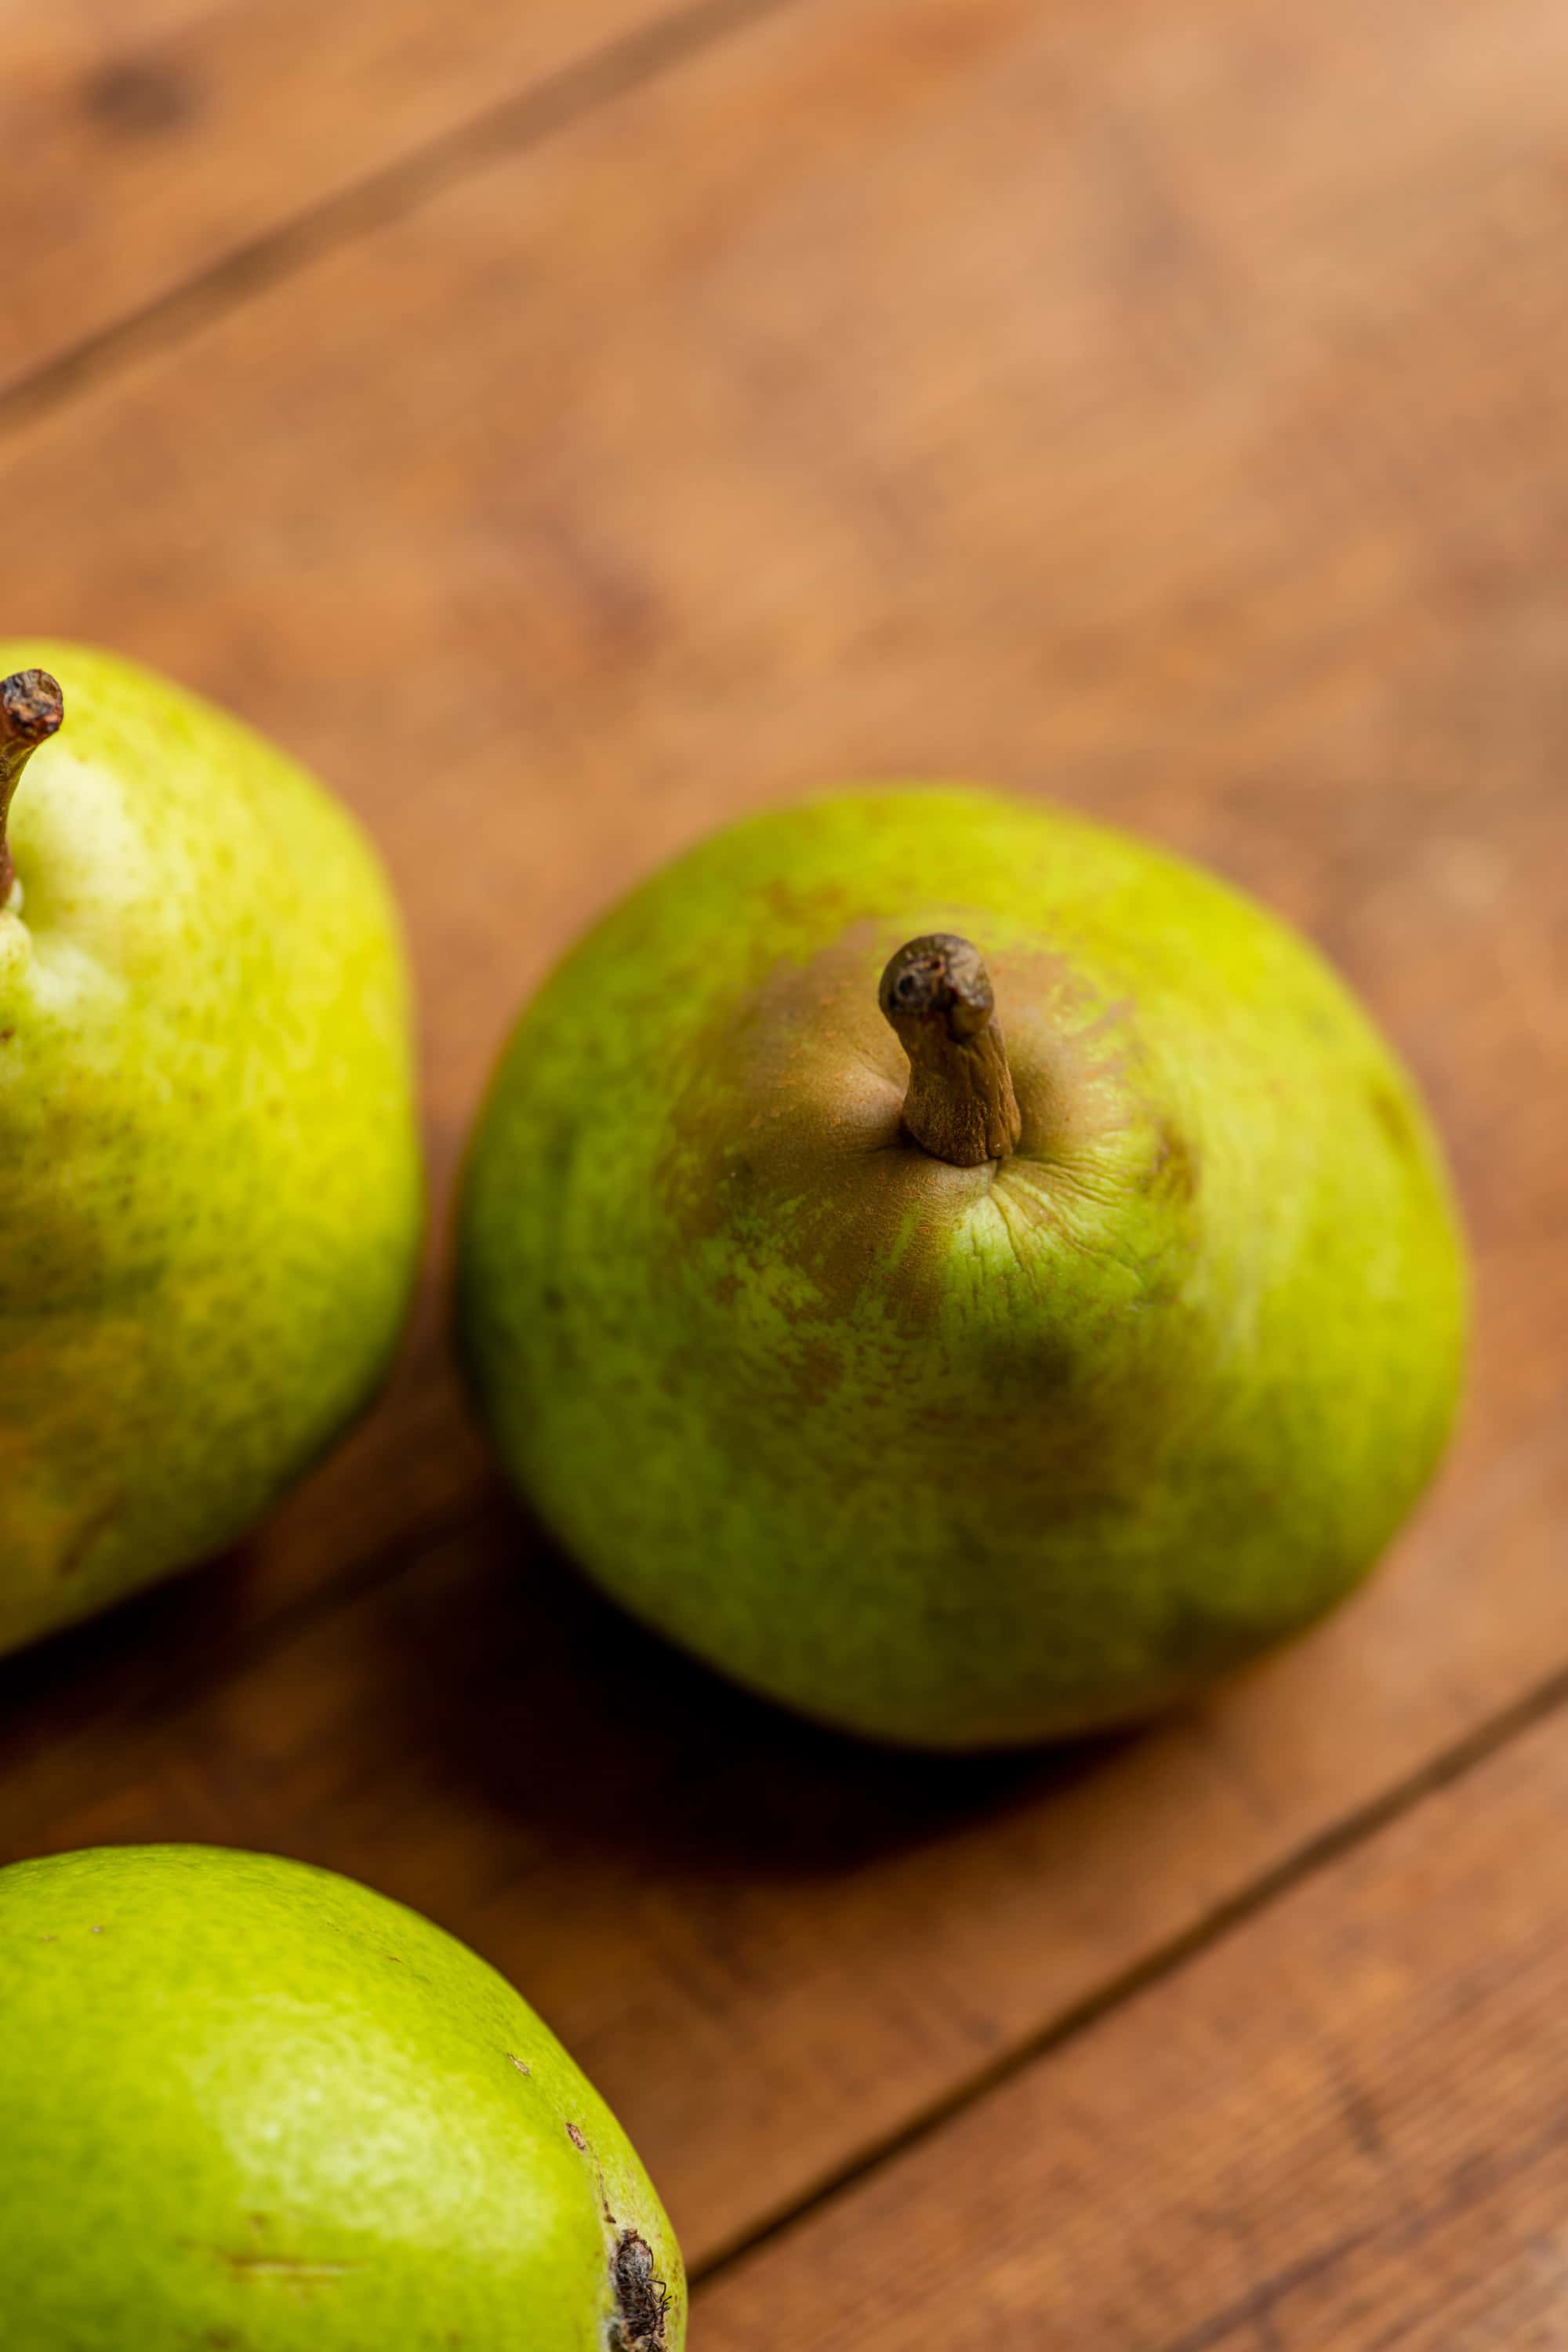 Pears on a wooden surafce.